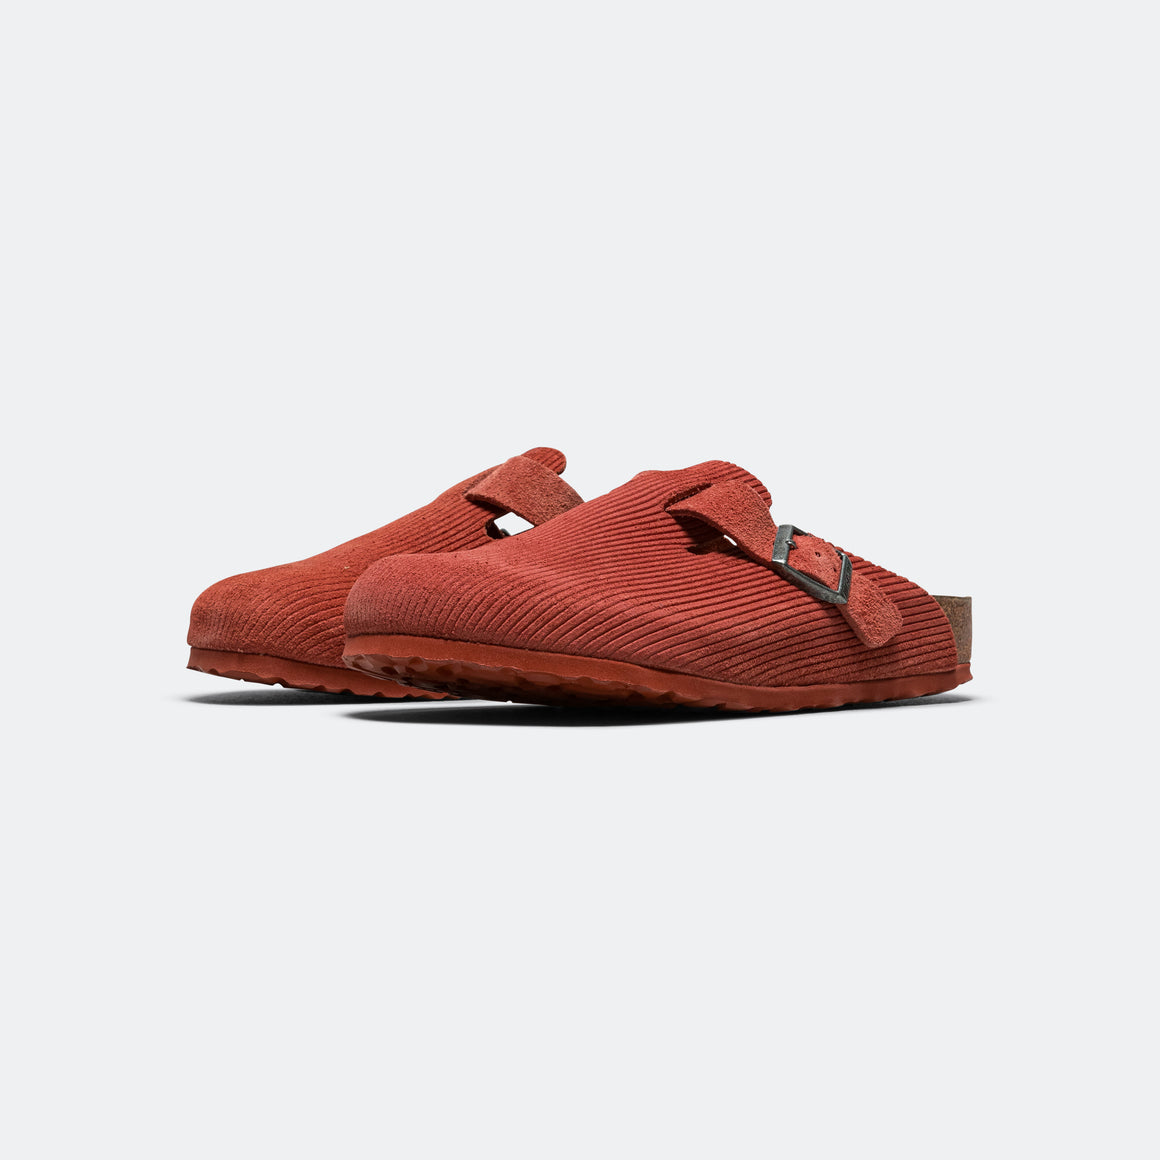 Boston Corduroy - Sienna Red Embossed Suede Leather